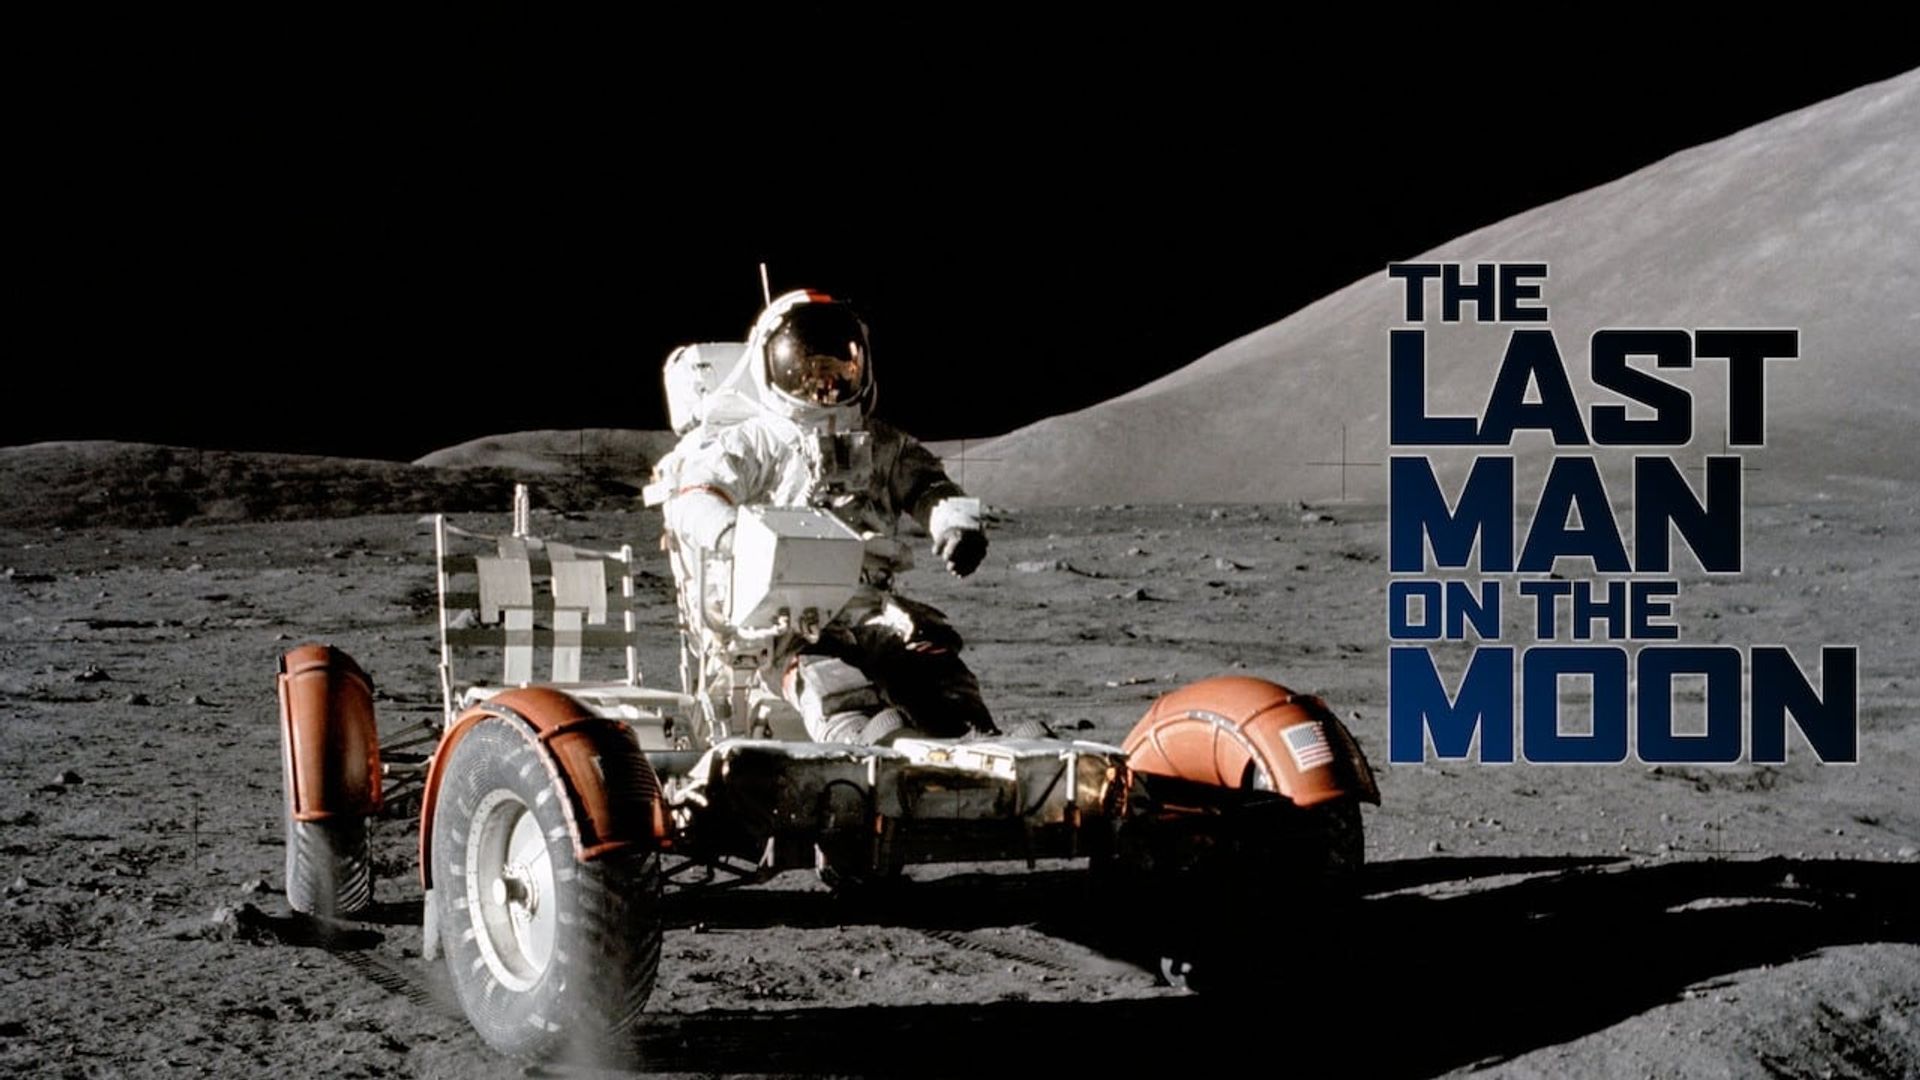 The Last Man on the Moon background